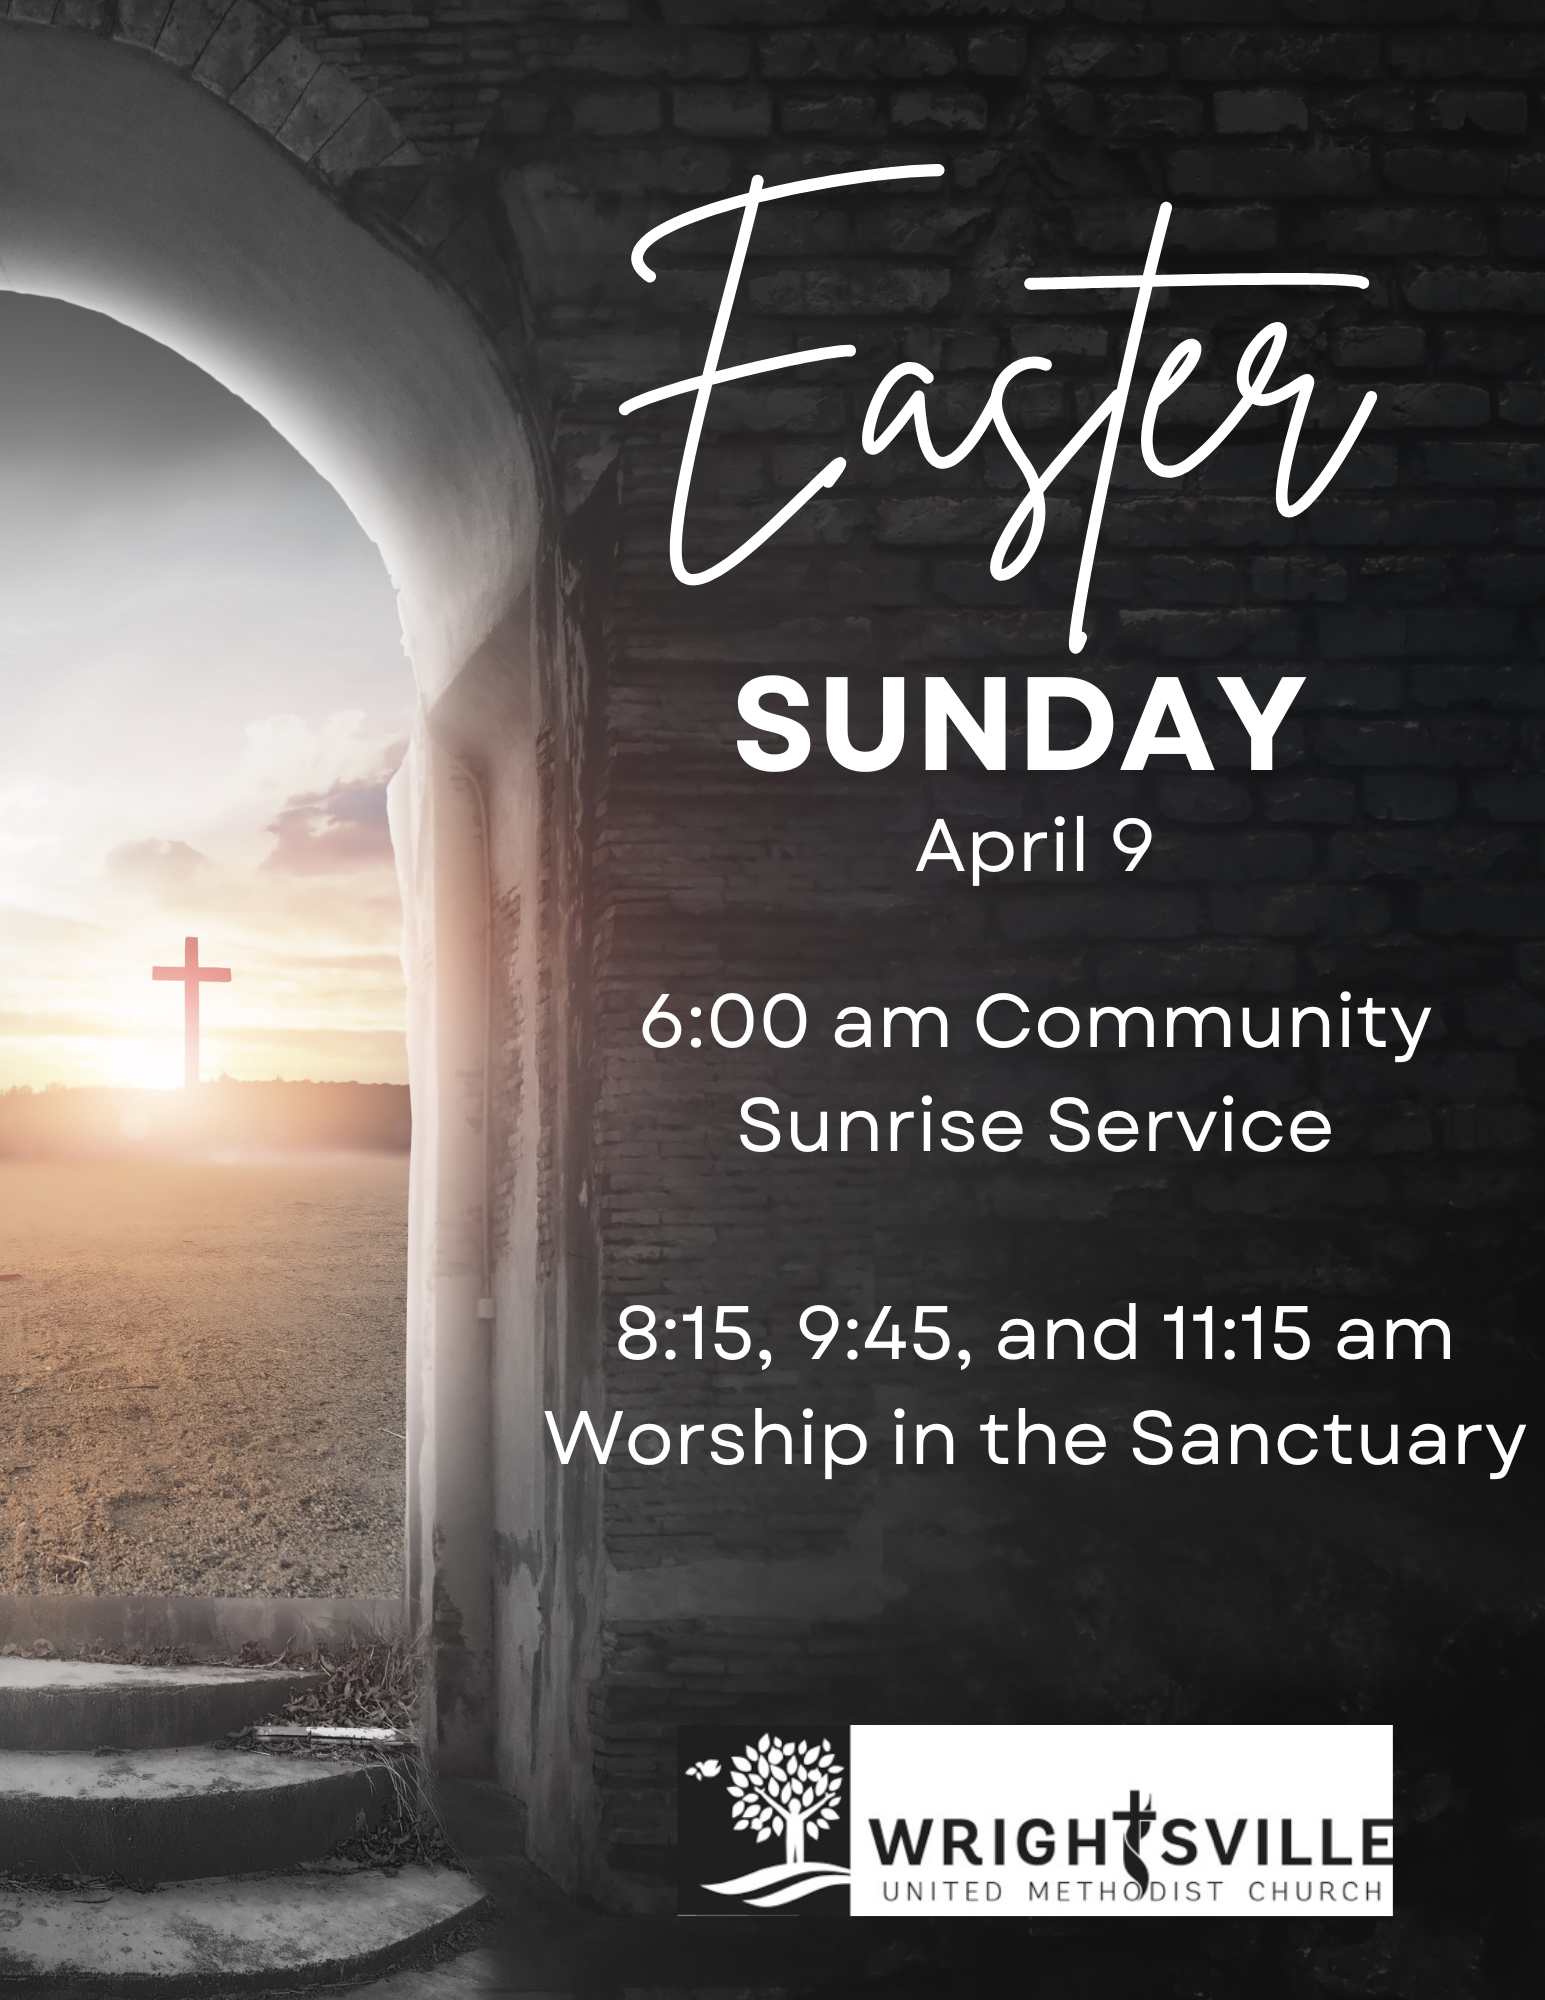 Easter Sunday Services - Wrightsville UMC